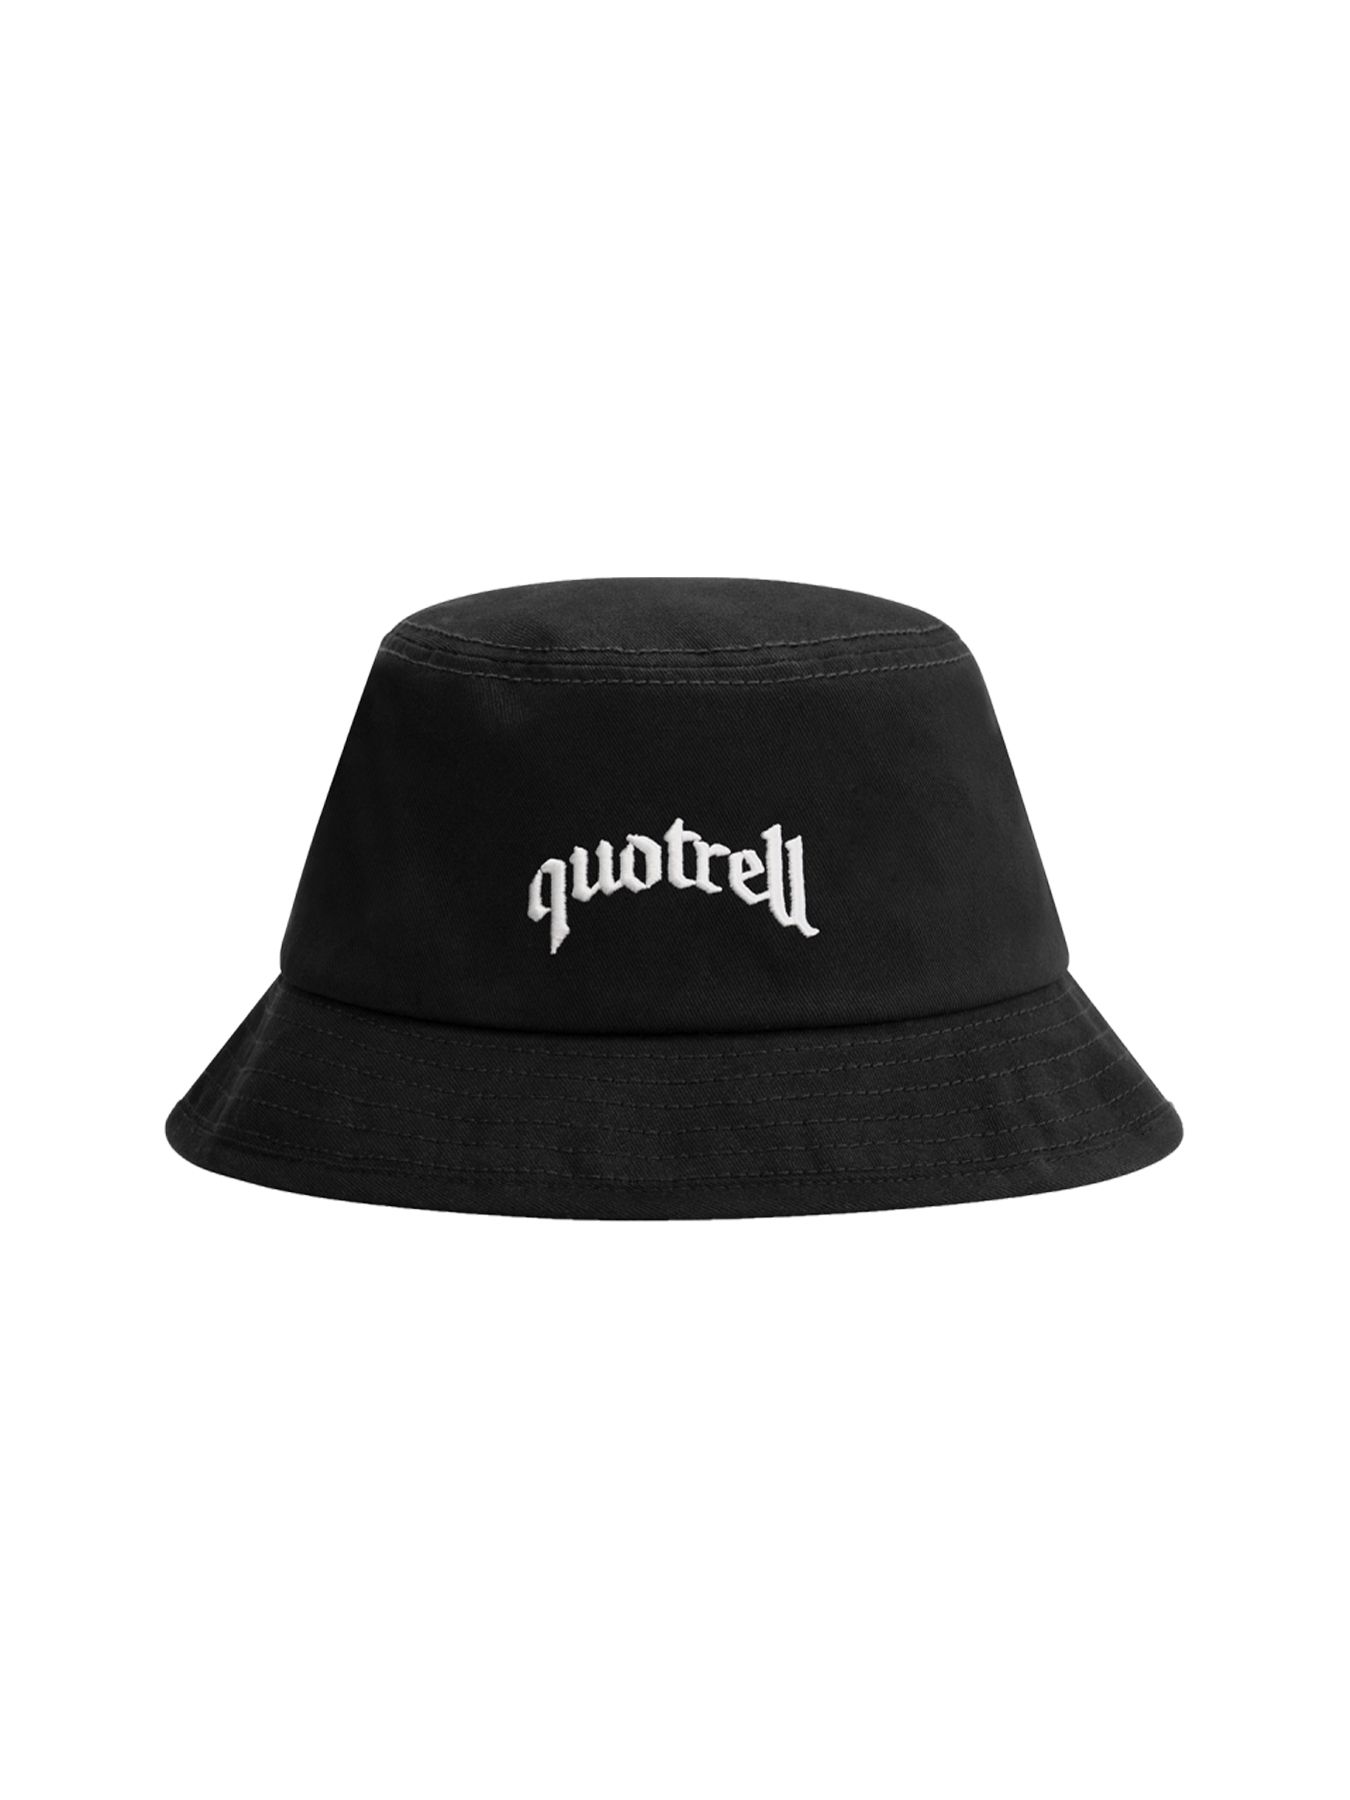 Quotrell Wing Bucket hat Black/White 00104037-904